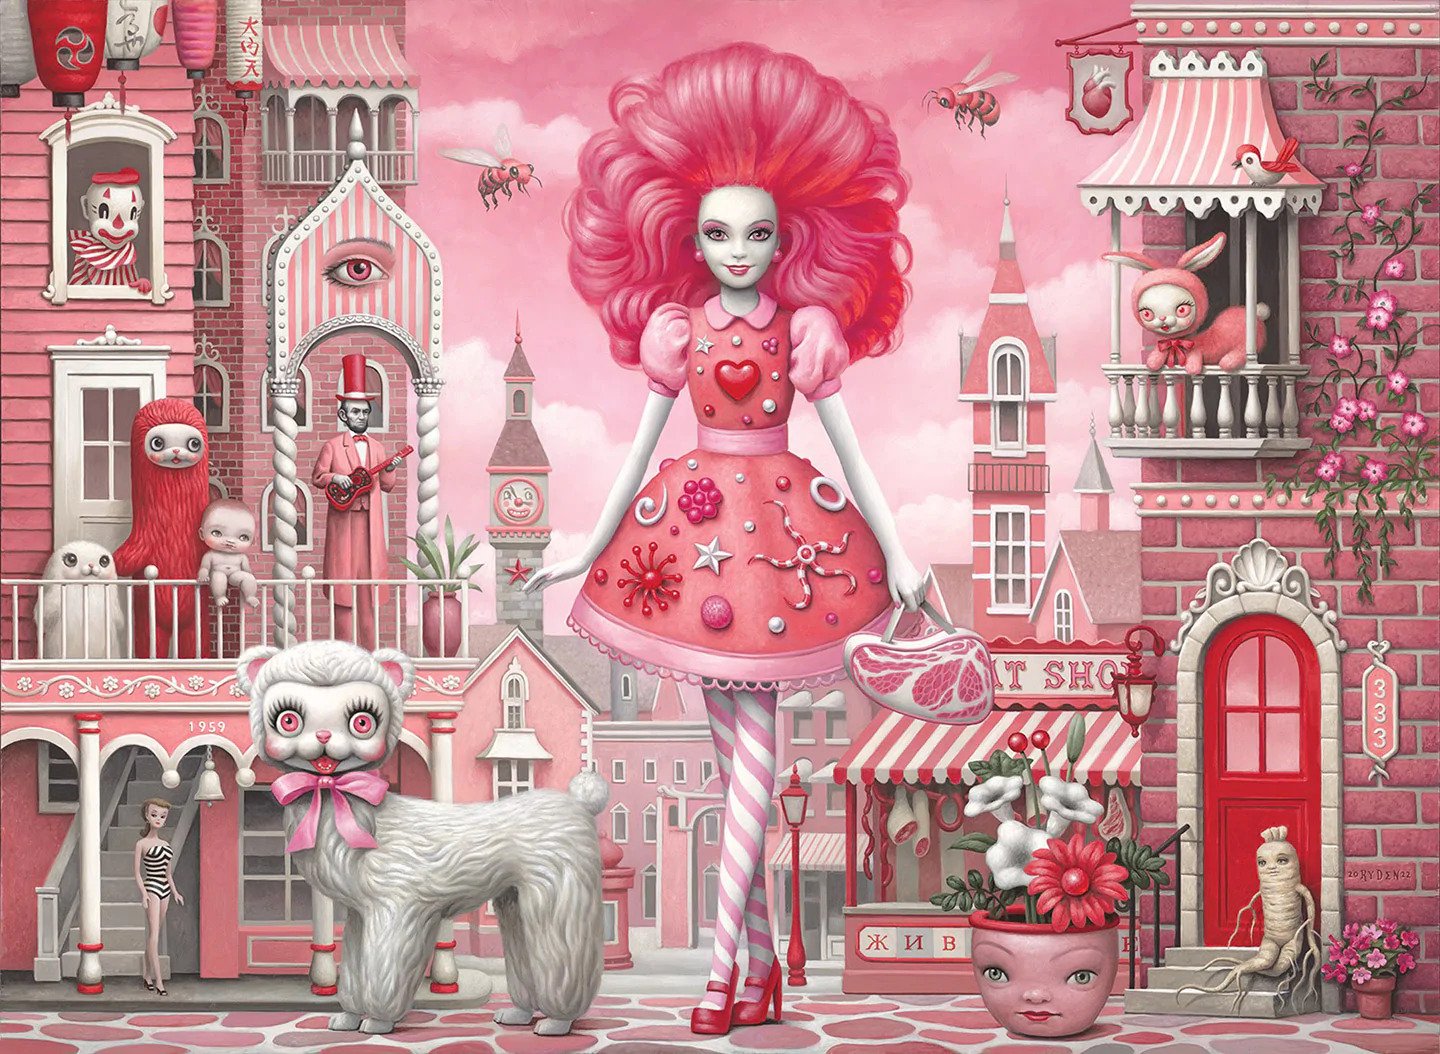 Kasmin Has Teamed Up With Mattel for a Pop-Up Launching Artist Mark Ryden's  New Line of Macabre-Pop Barbie Dolls